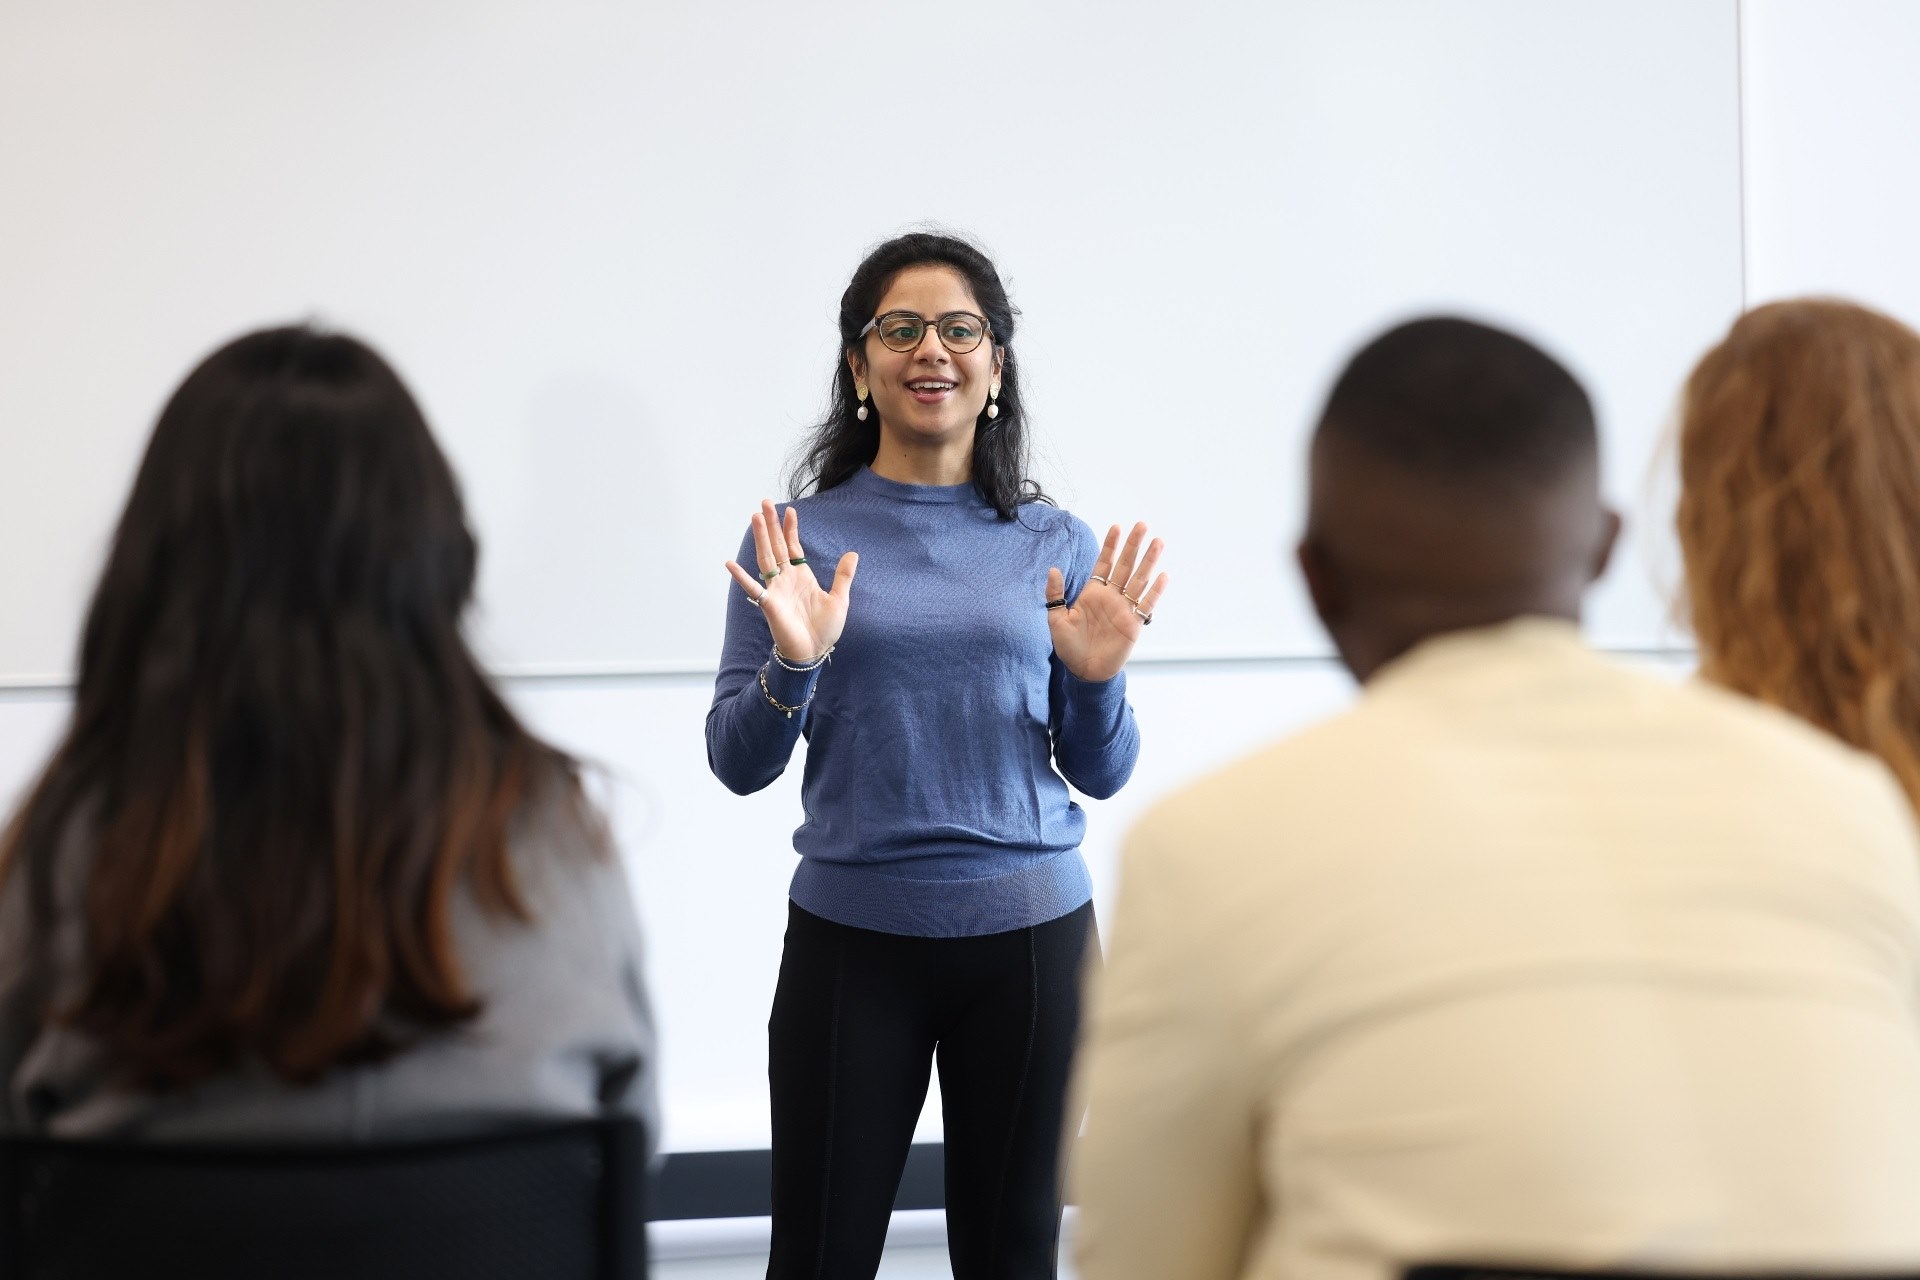 A woman stands at the front of a group of people. Her hands are up and mouth is part way open as if in the middle of delivering a lecture.